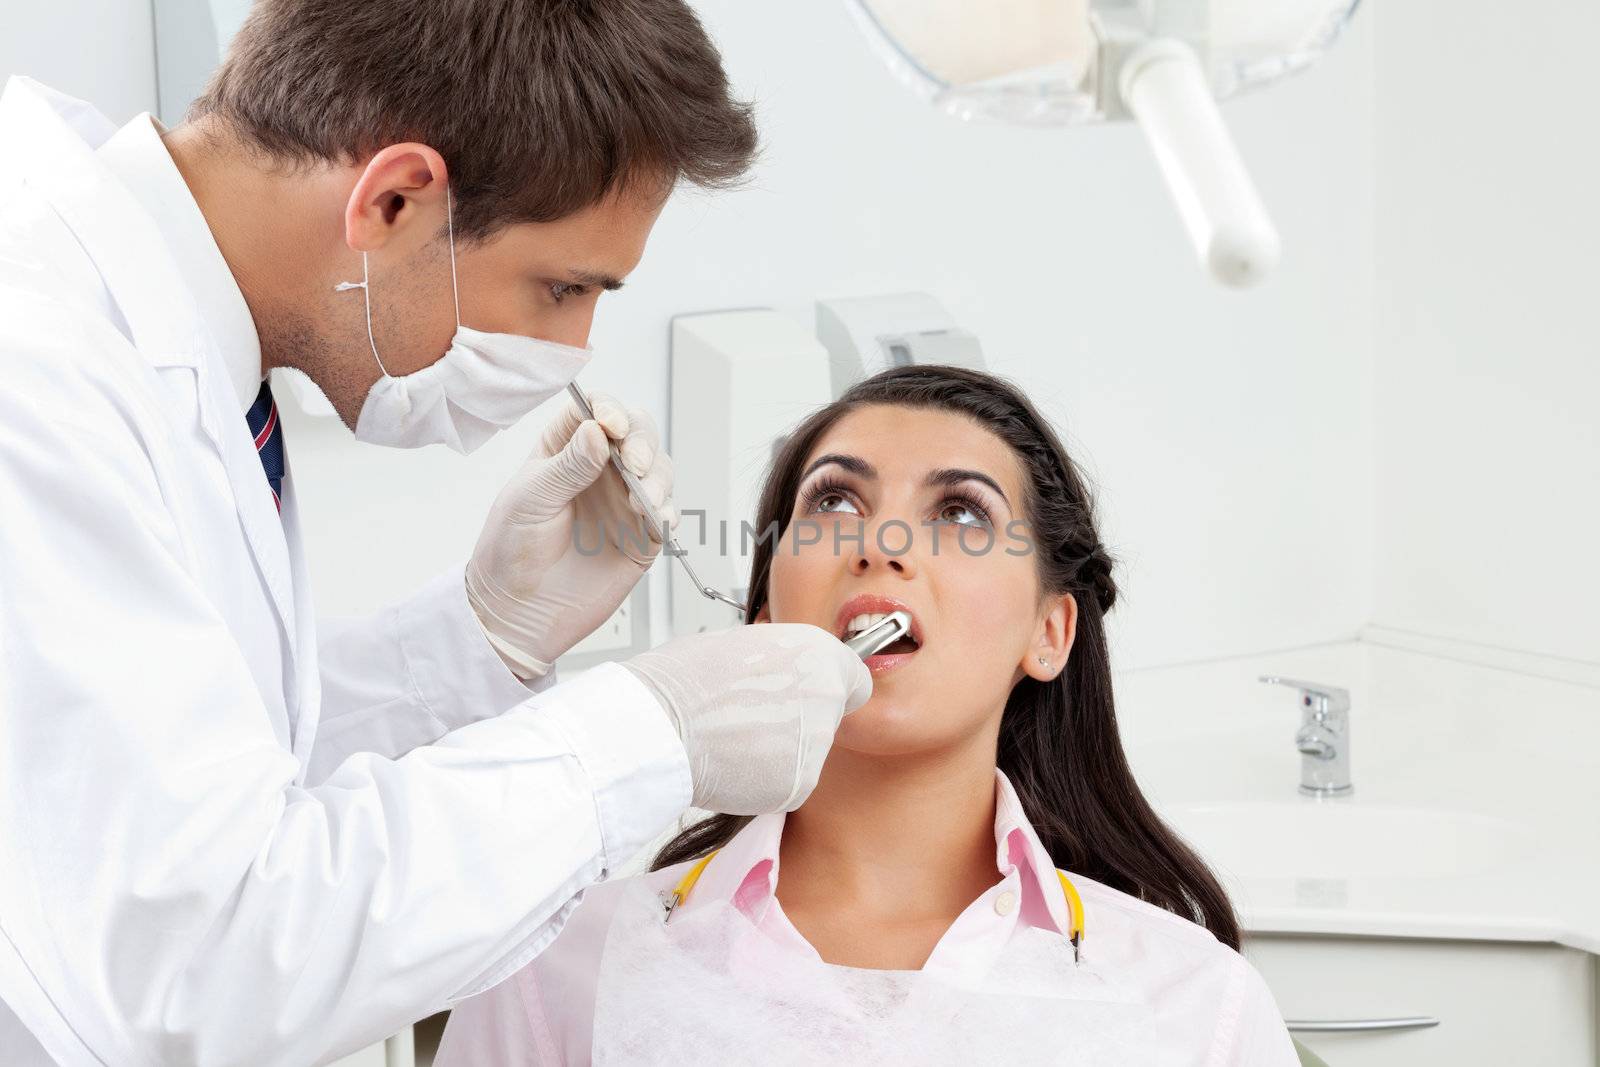 Young male dentist examining patient's mouth in clinic